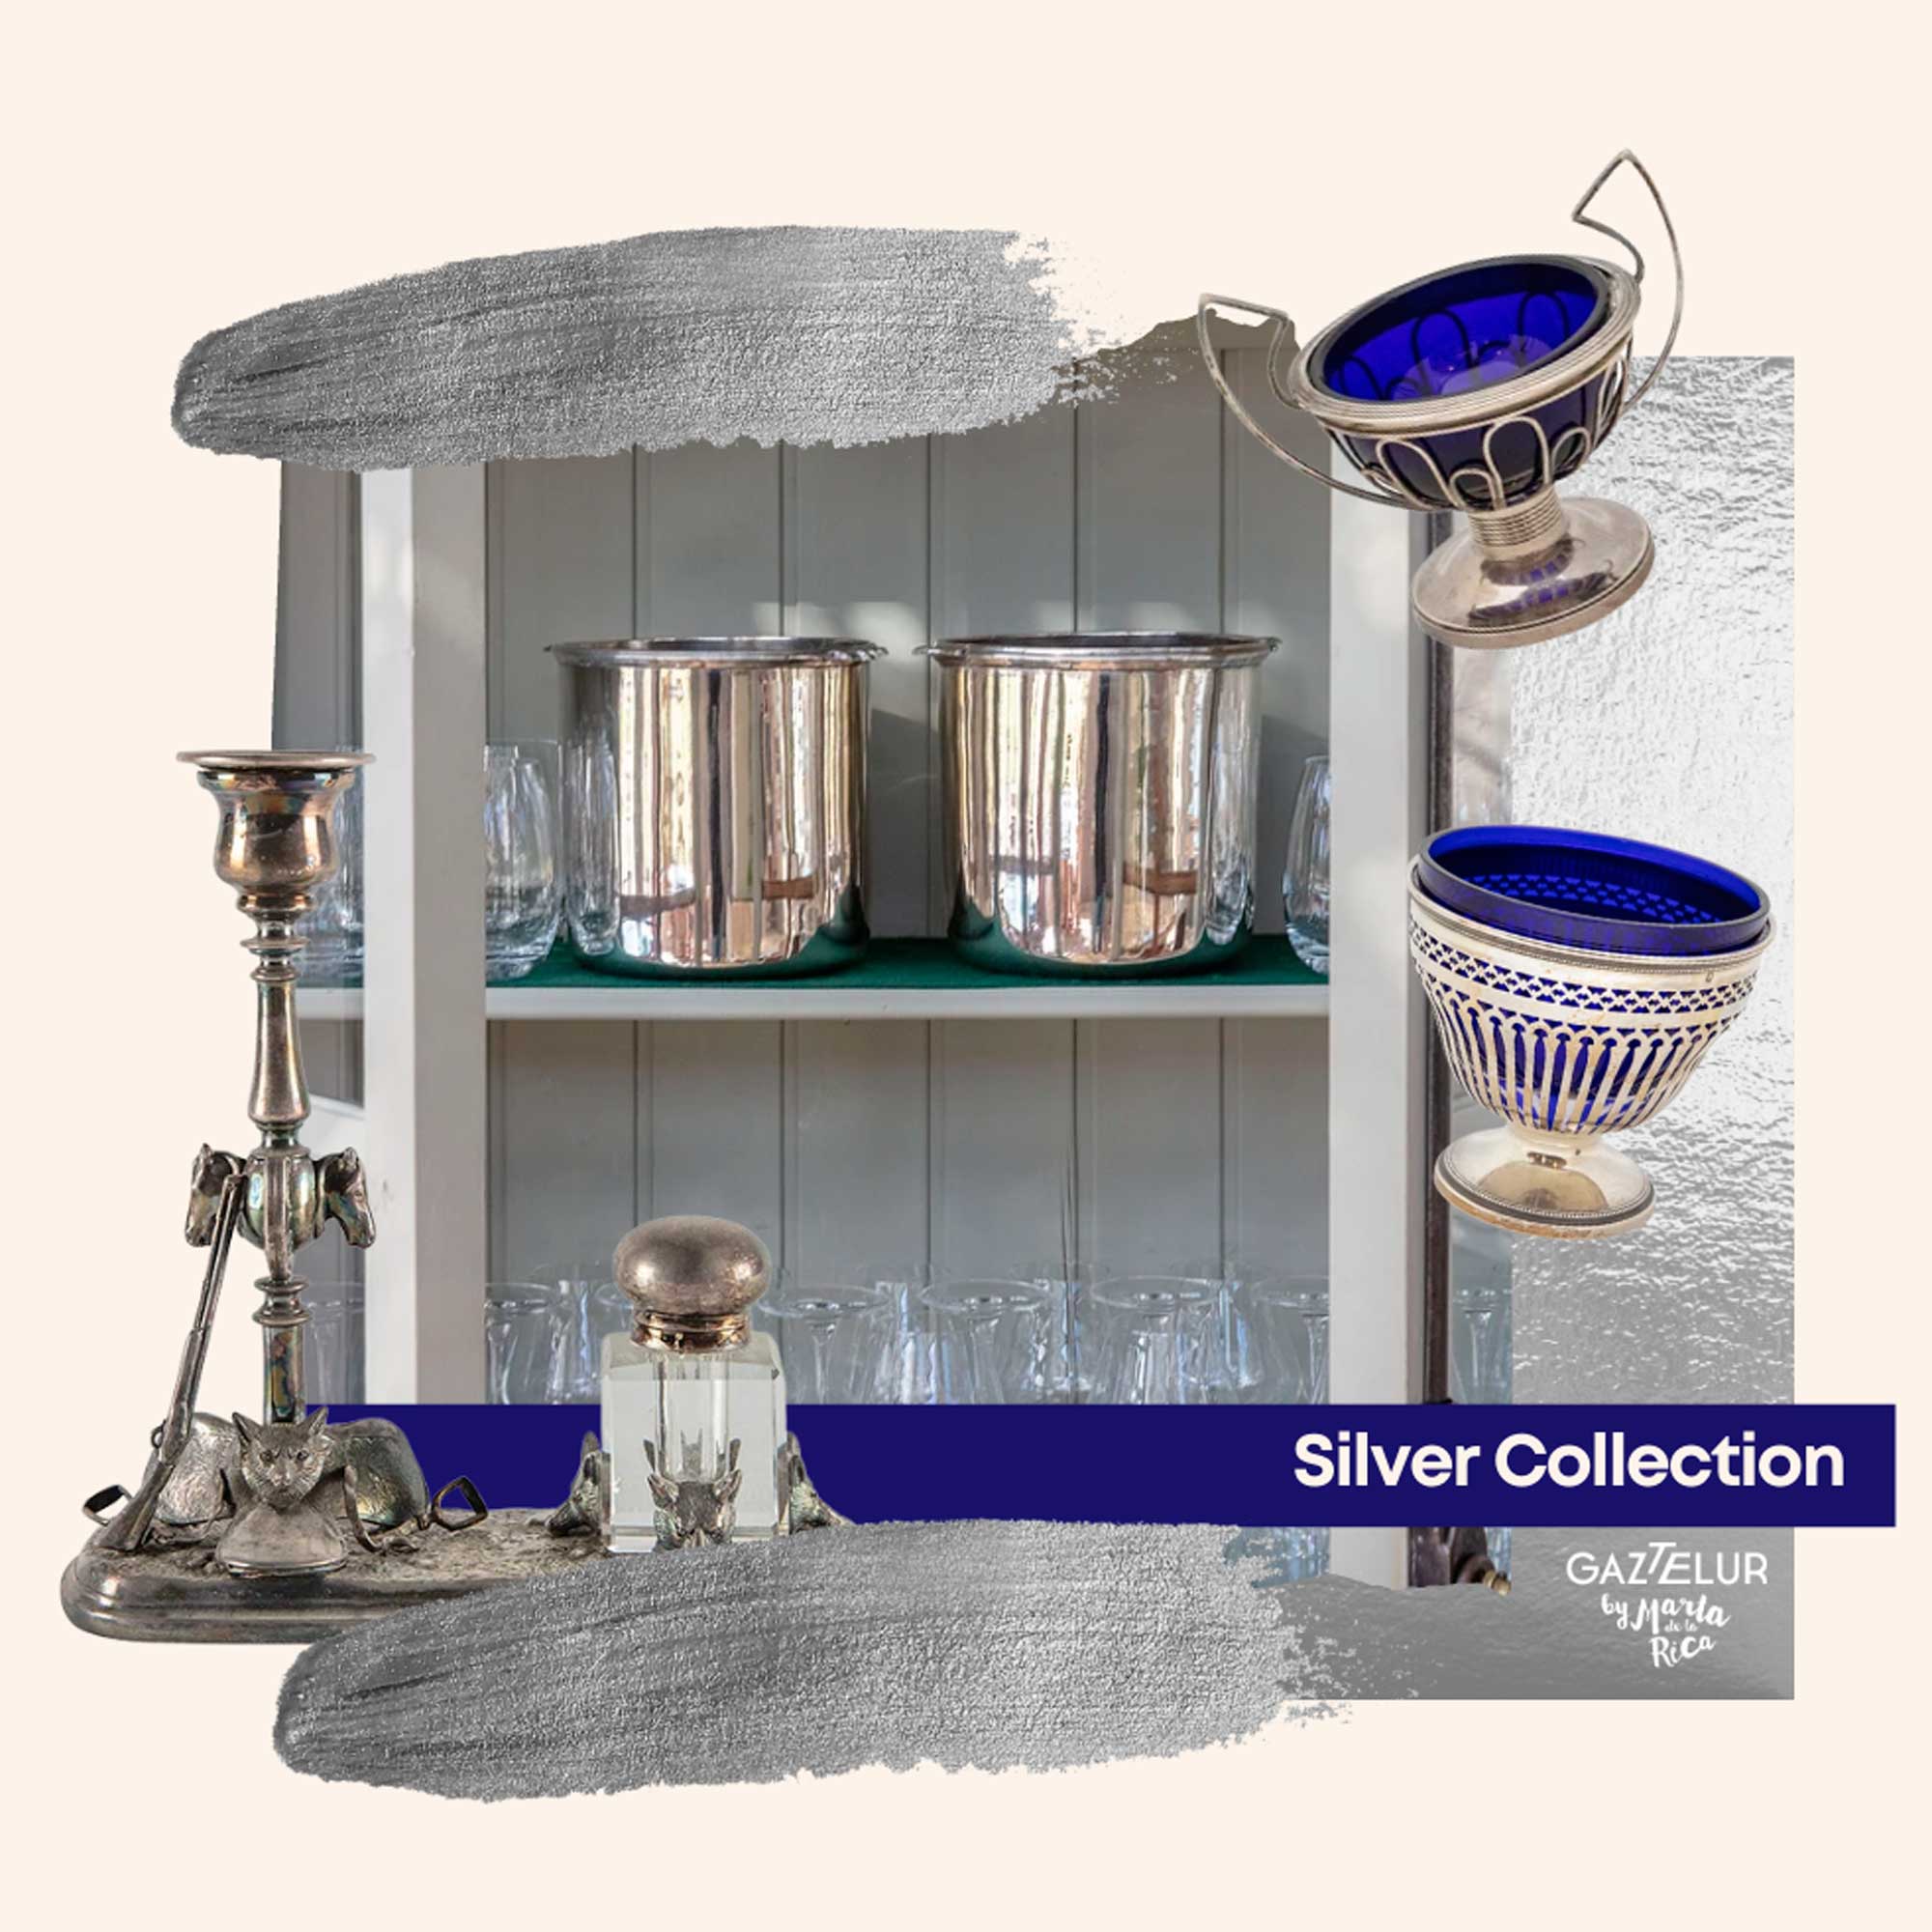 THE SILVER COLLECTION